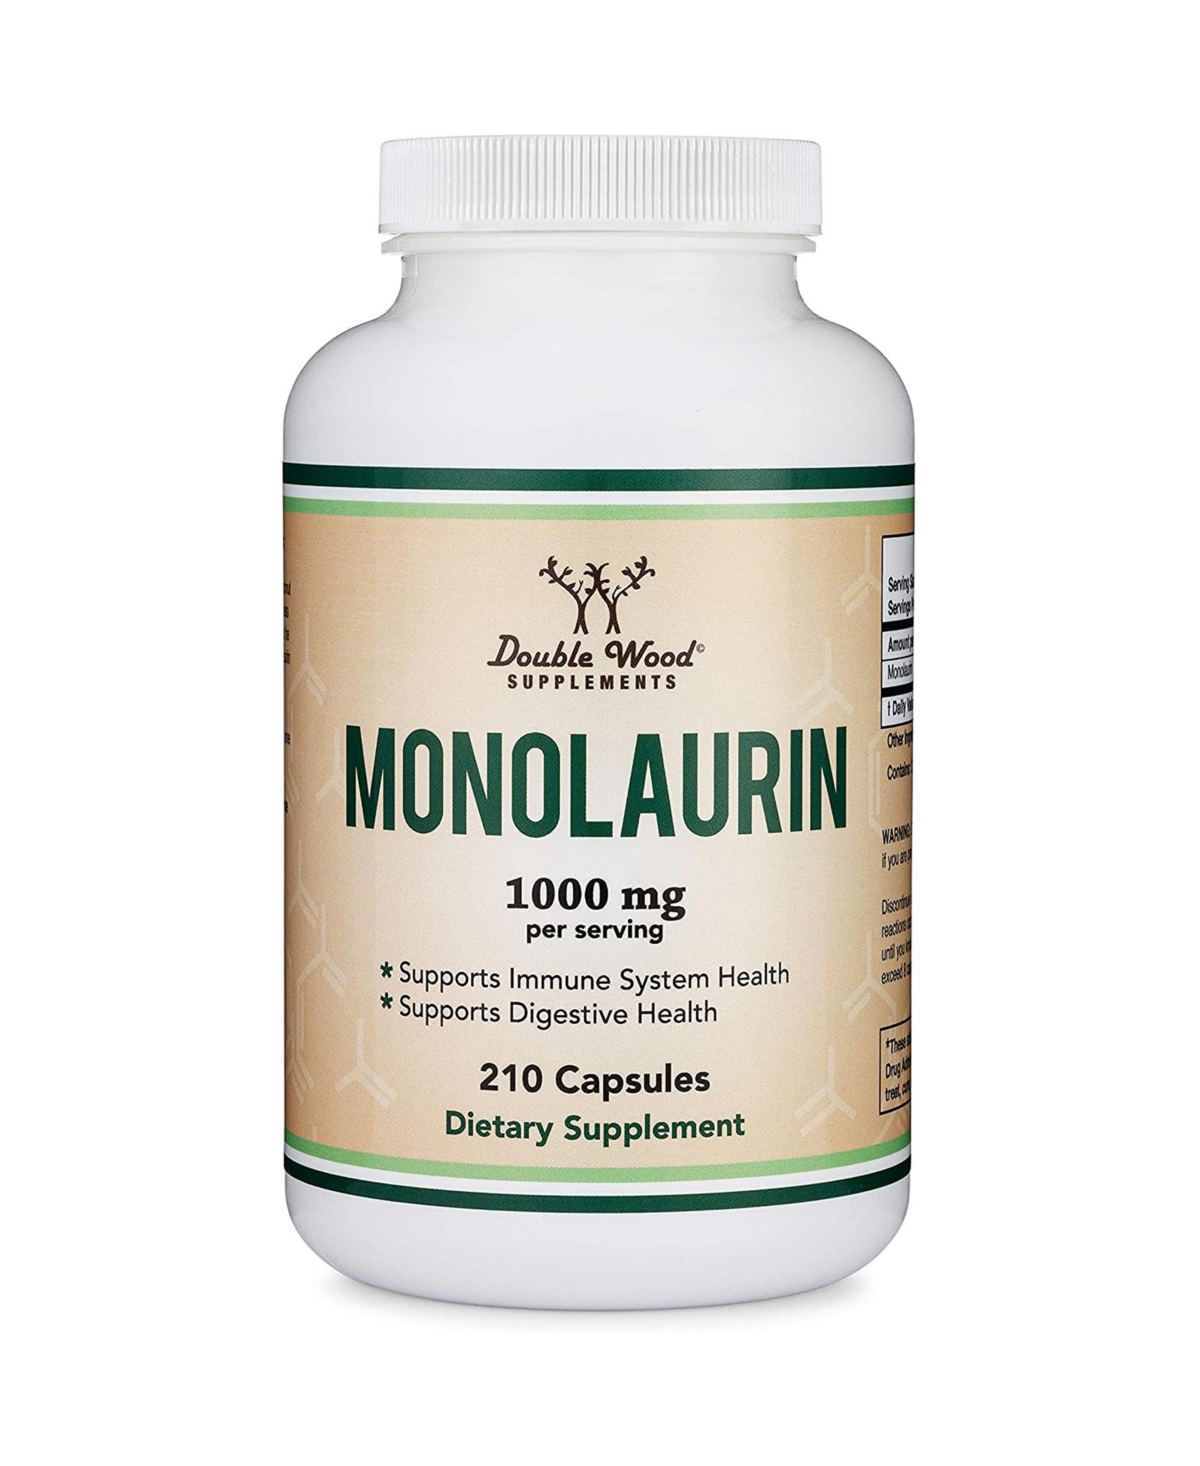 Monolaurin - 210 capsules, 1000 mg servings